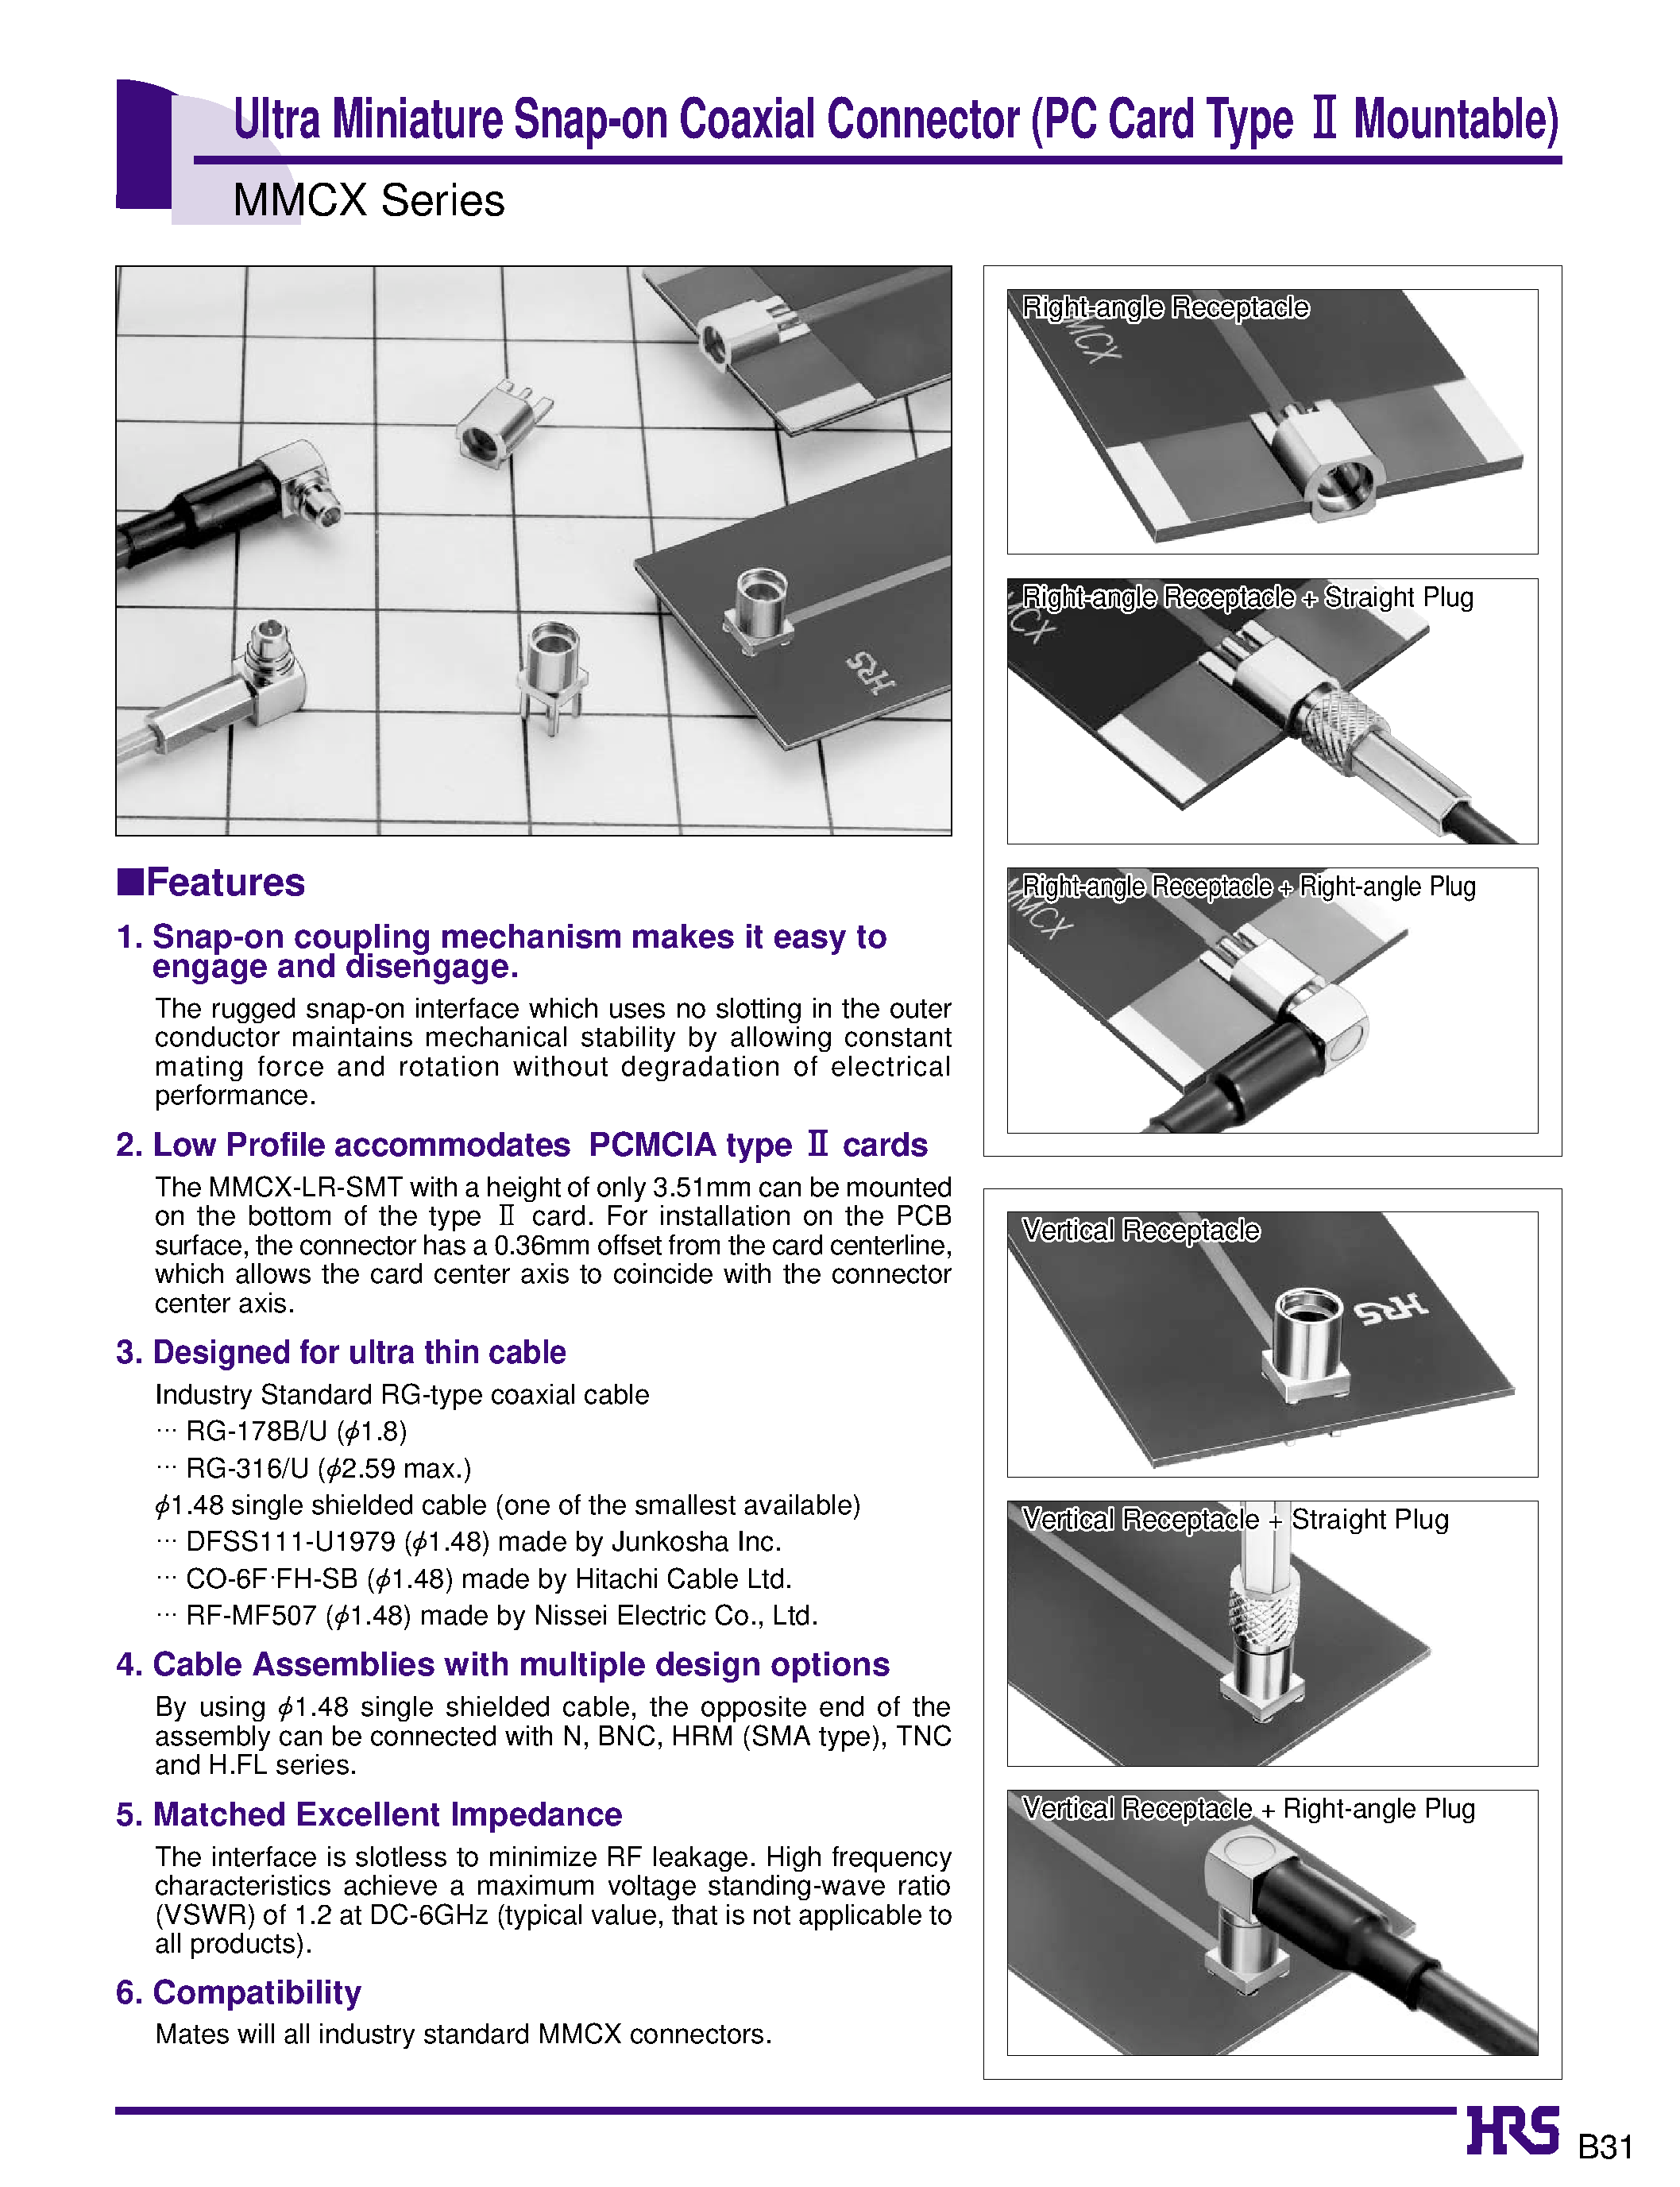 Datasheet MMCX-J-SMT - Ultra Miniature Snap-on Coaxial Connector (PC Card Type 2 Mountable) page 1